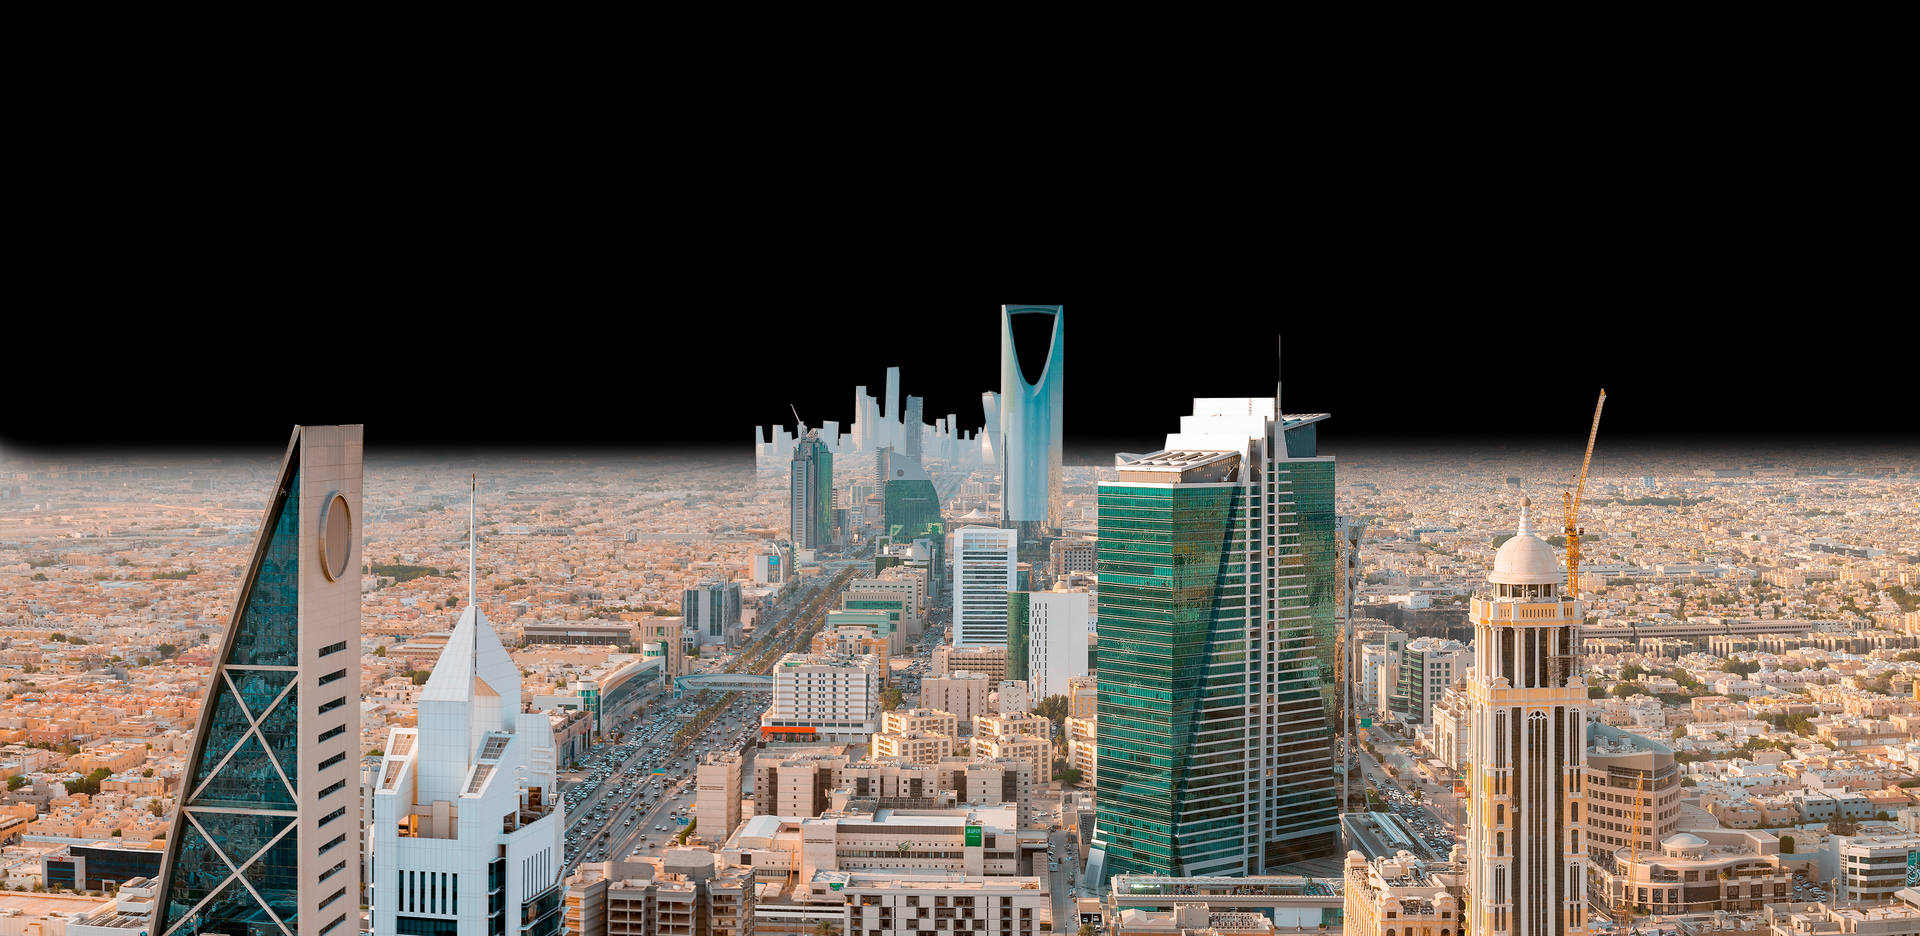 Majestic Skyscrapers Towering Over Riyadh Background